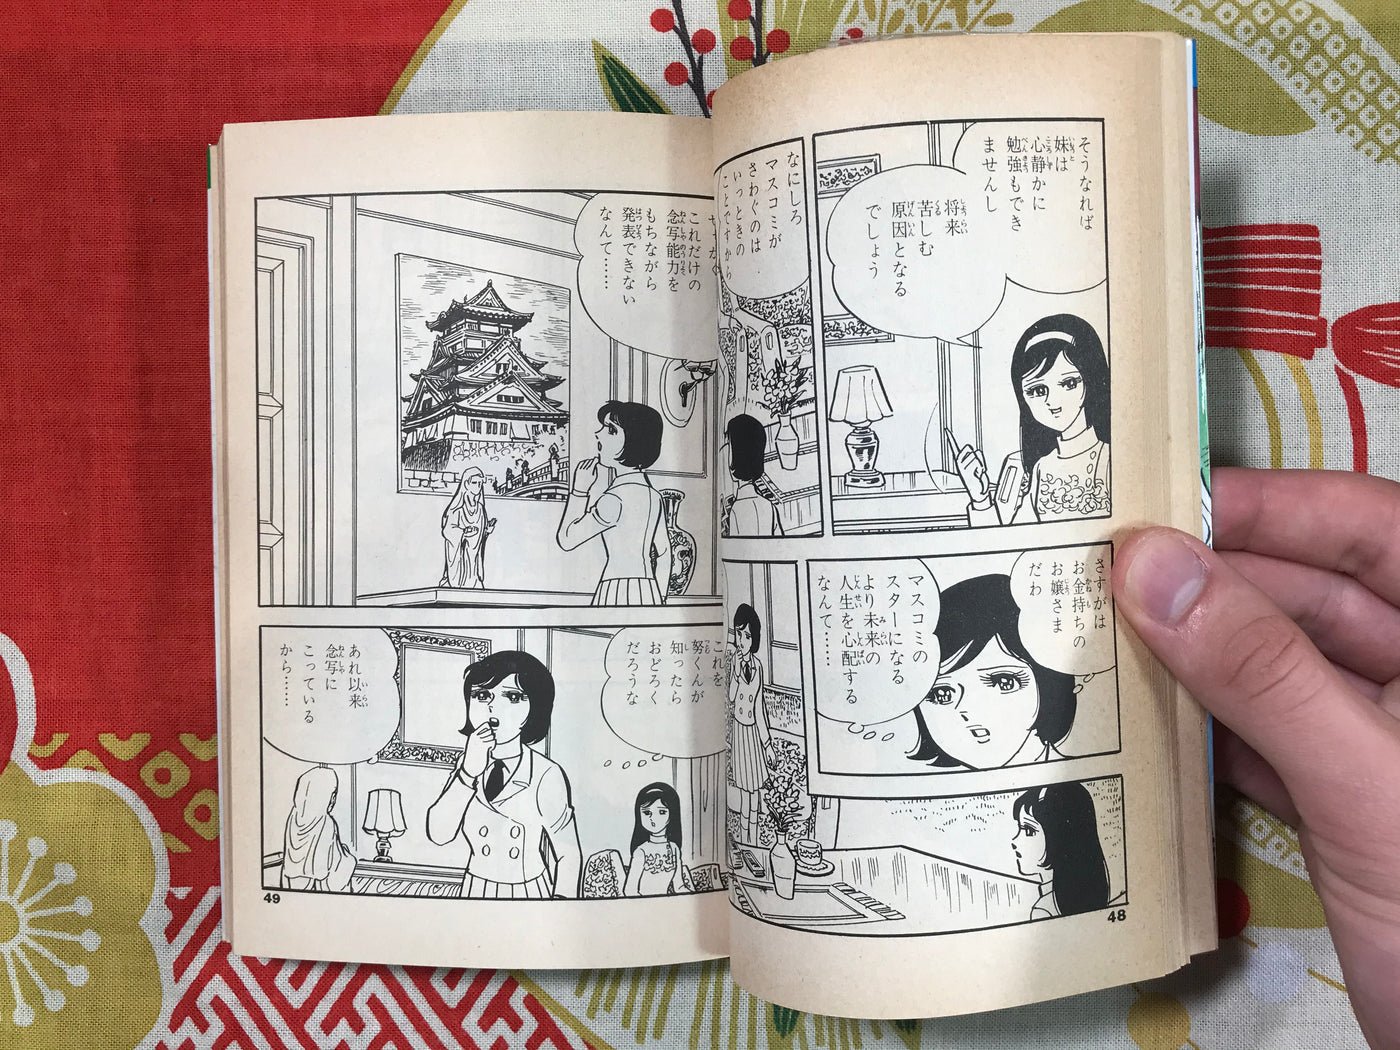 Beckoning of the Dead Girl by Kouji Sugito (1983)